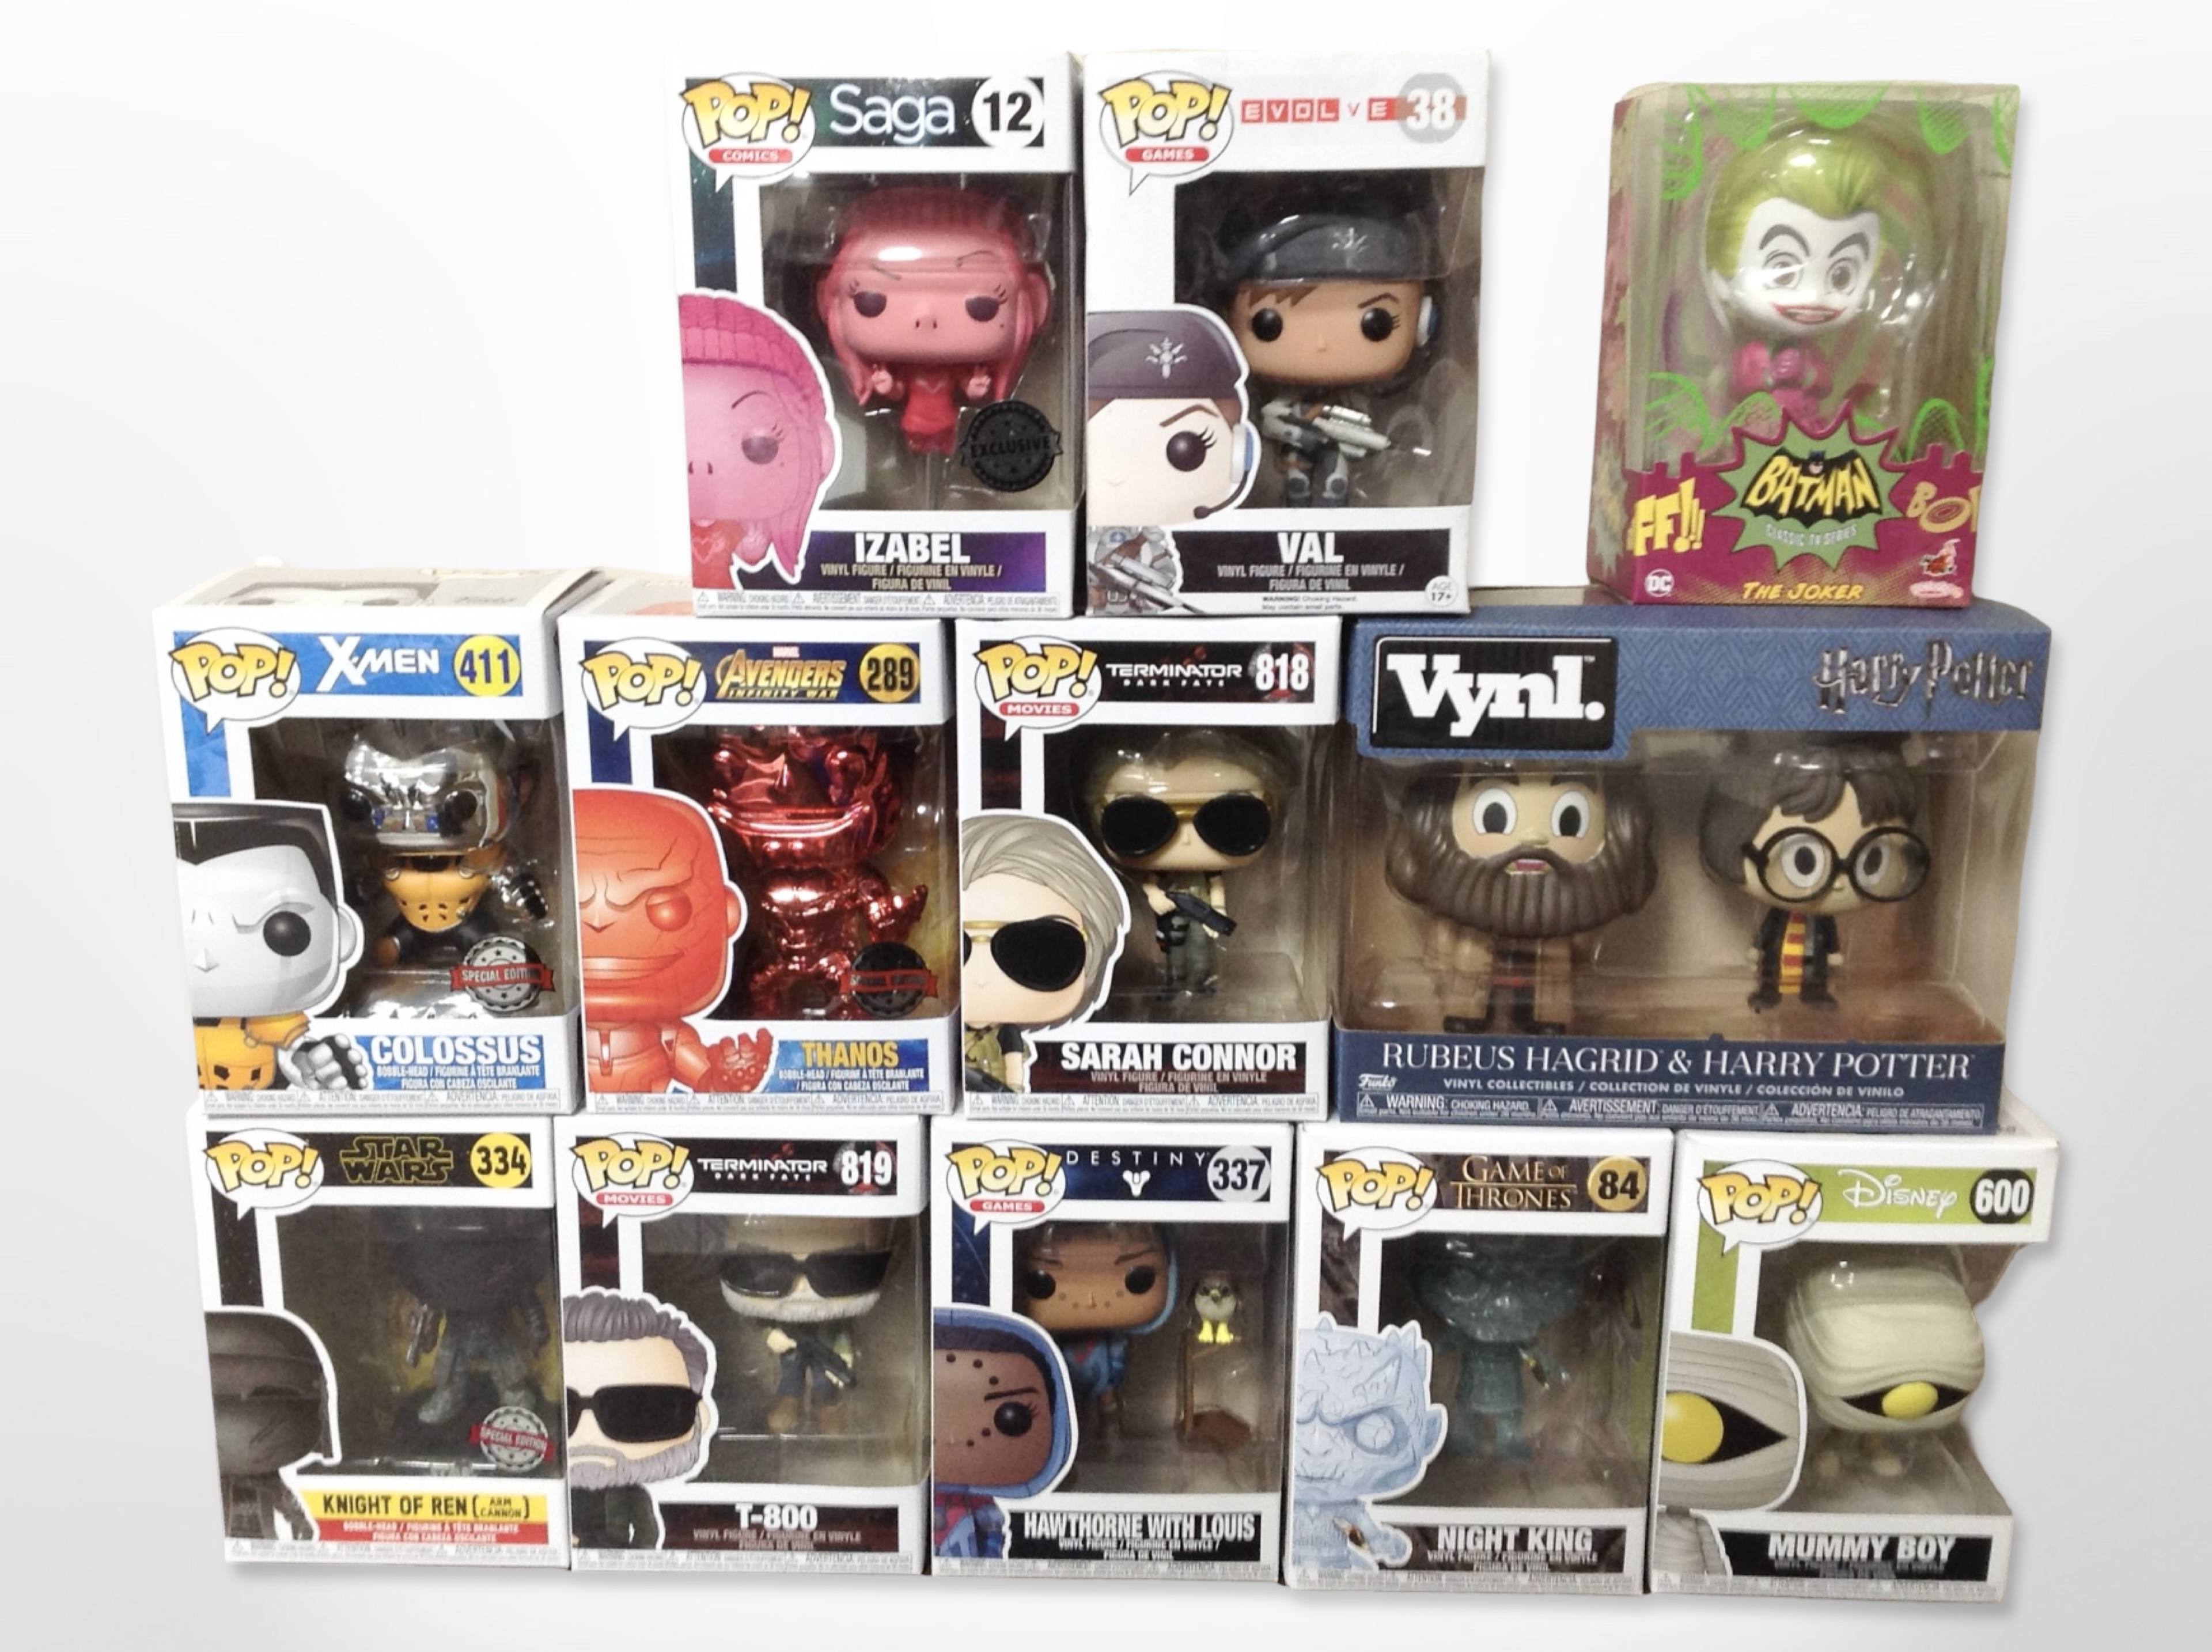 12 Funko Pop! and other figurines, including Marvel, Harry Potter, Game of Thrones, etc., boxed.